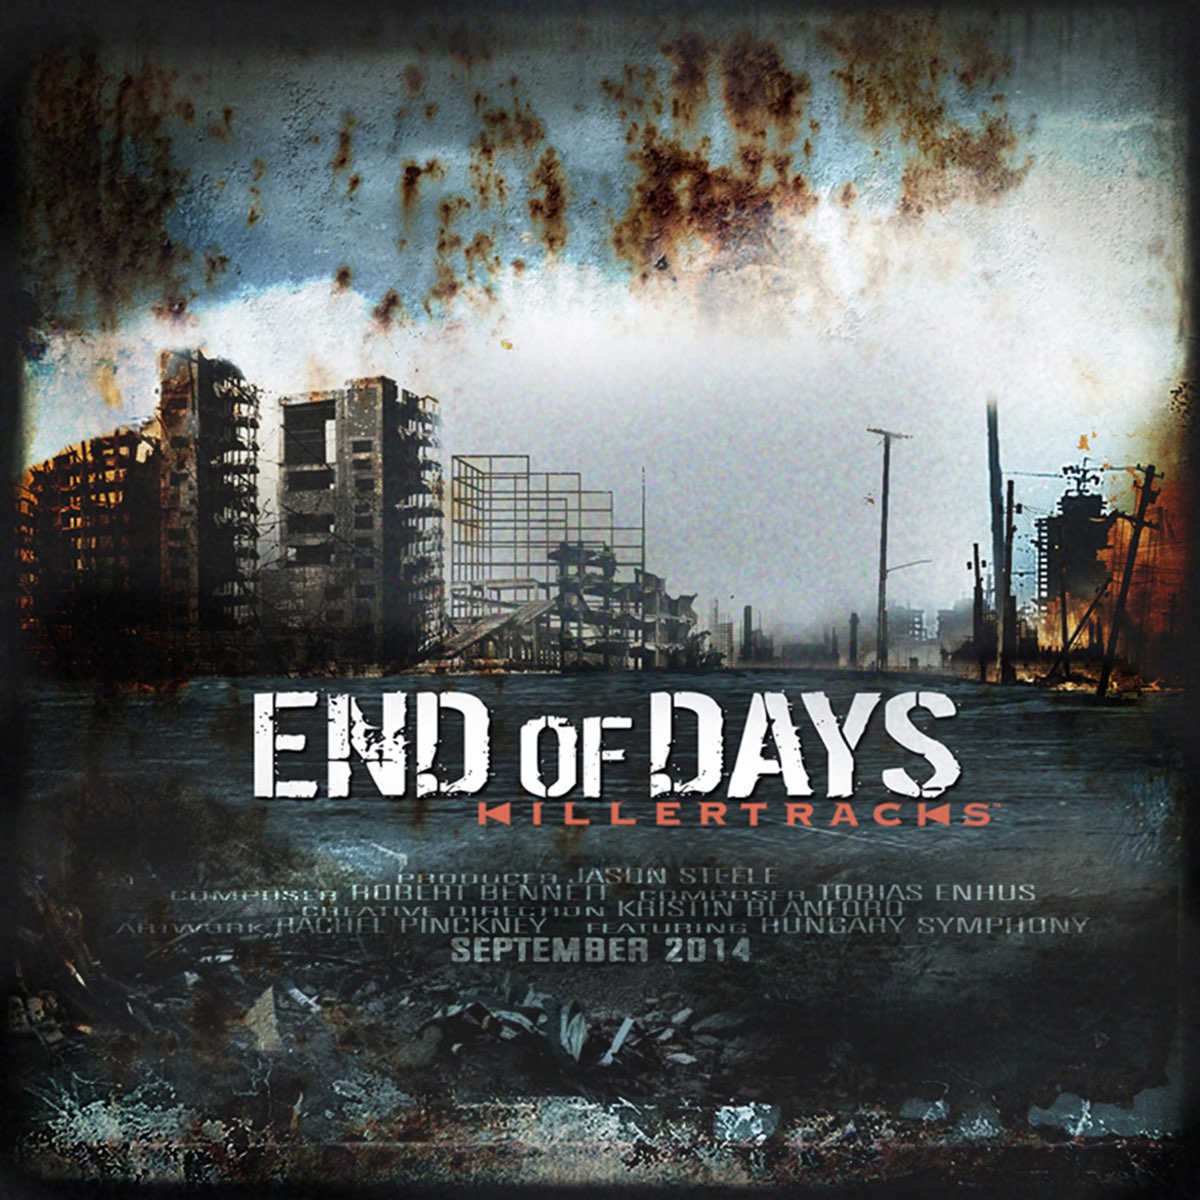 The end soundtrack